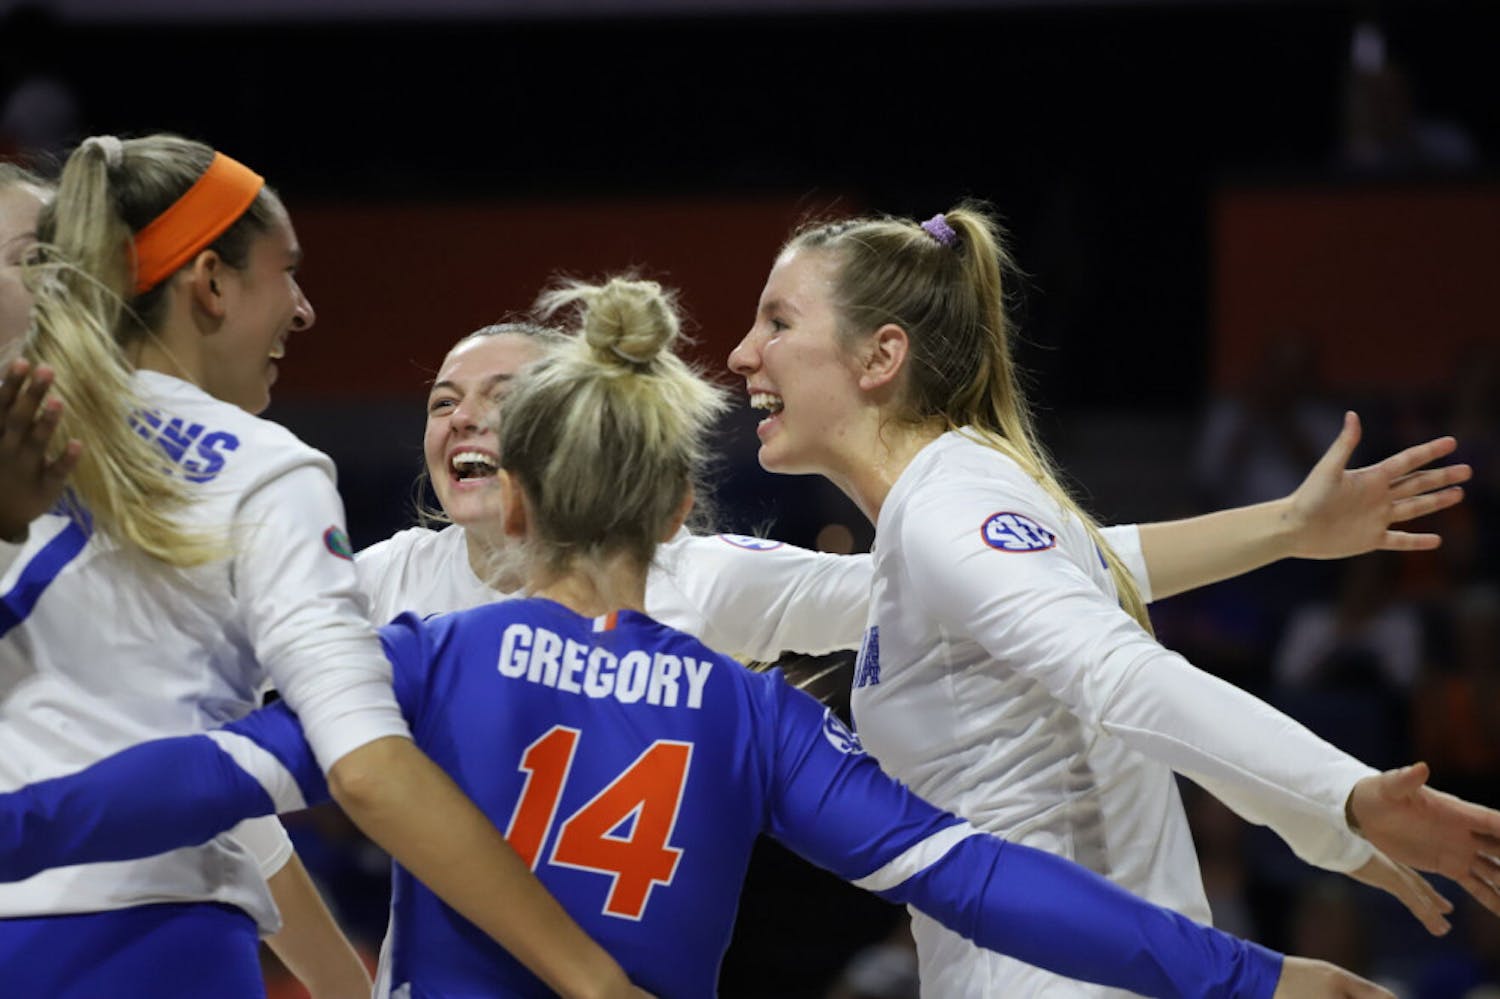 The Gators celebrate a successful play at home against Texas A&amp;M last year. This season, Florida extended its winning streak to eight games after defeating Arkansas Friday.